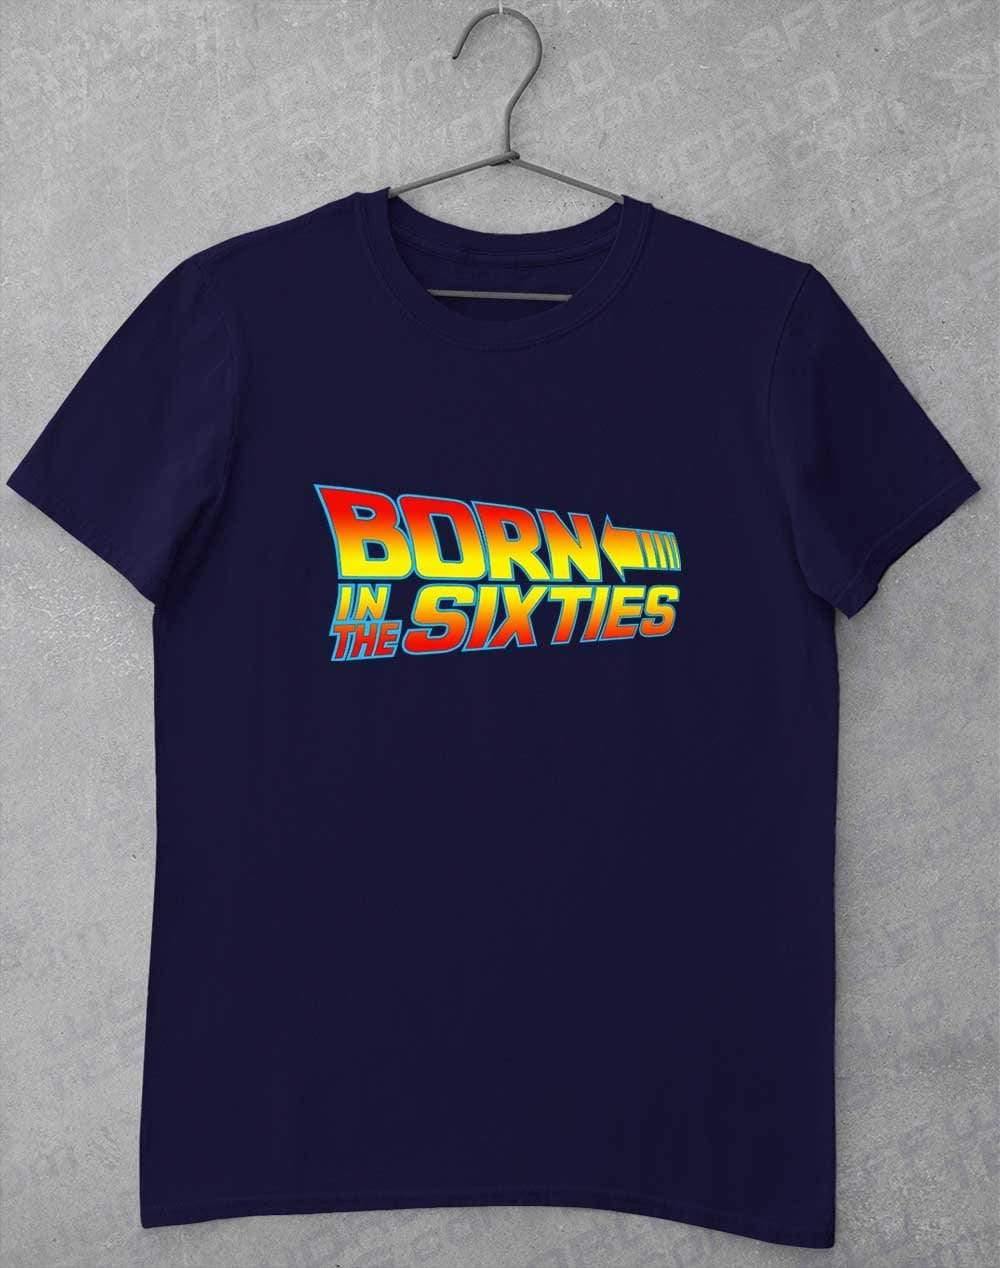 Born in the... (CHOOSE YOUR DECADE!) T-shirt THE SIXTIES - Navy / S  - Off World Tees